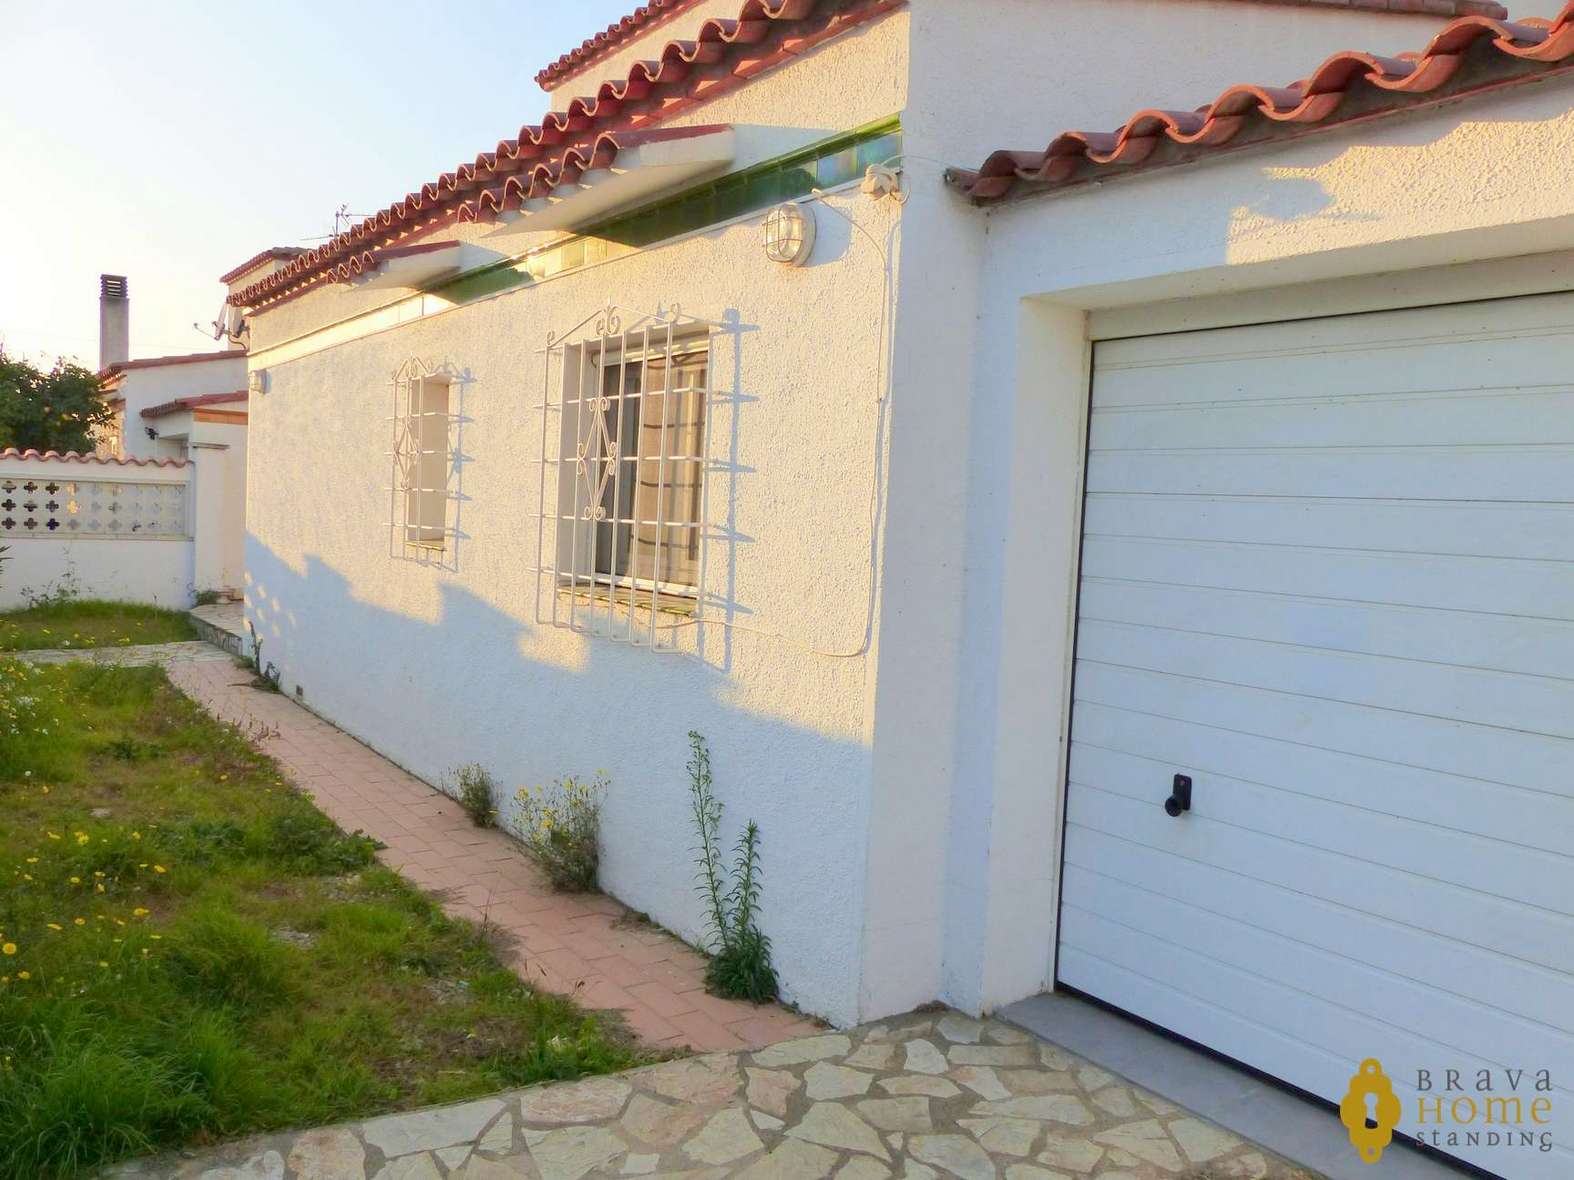 Nice 3 bedroom house for sale in Empuriabrava with large garage